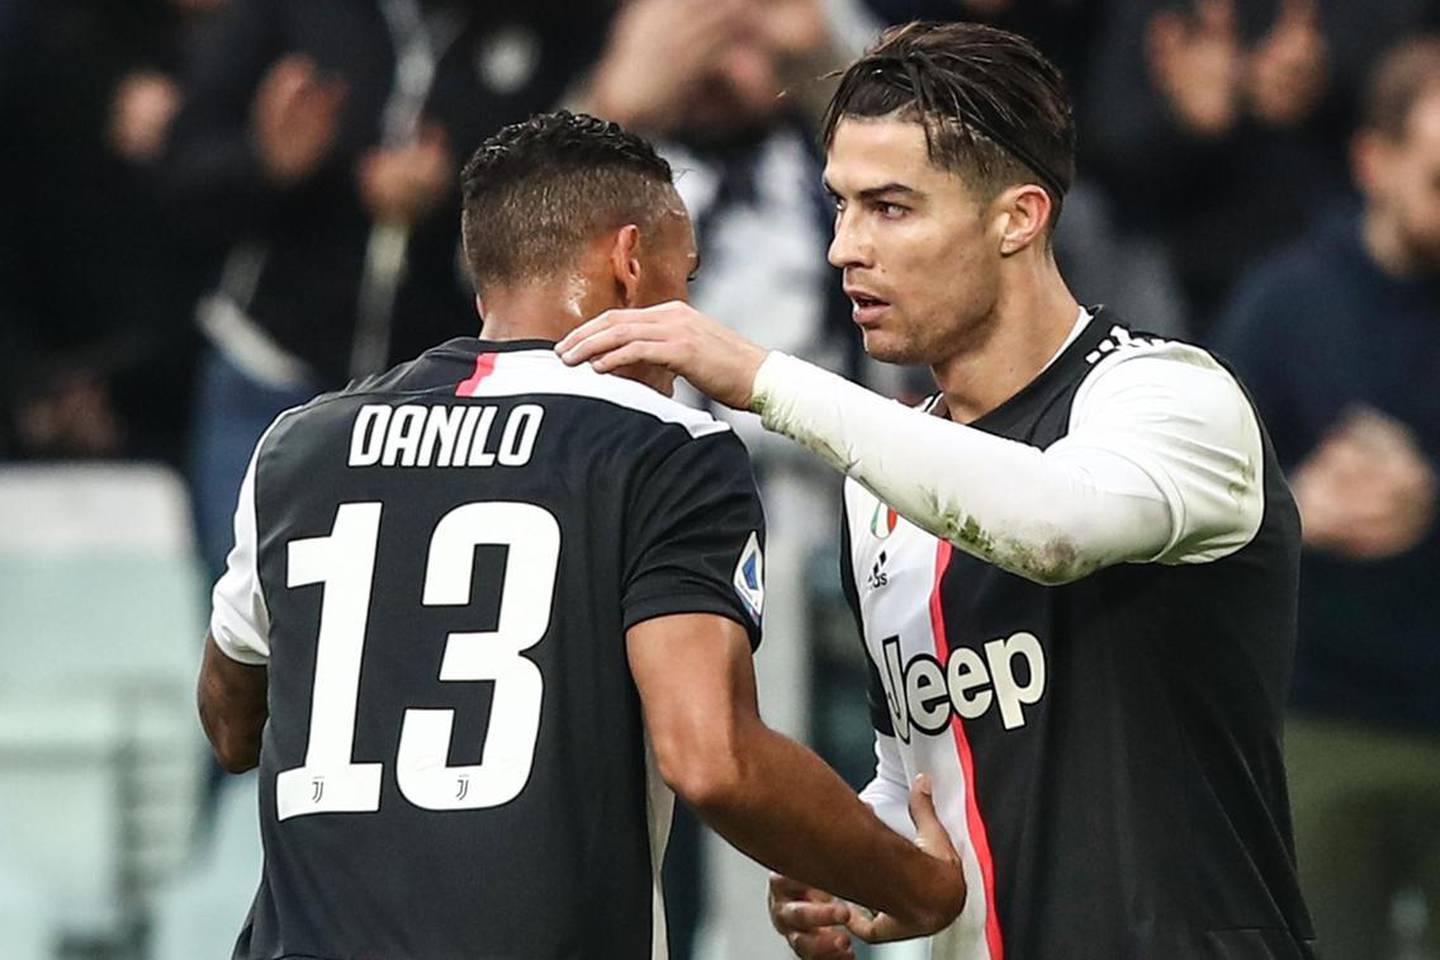 Juventus striker Cristiano Ronaldo, right, has scored 11 goals in 19 appearances this term. AFP